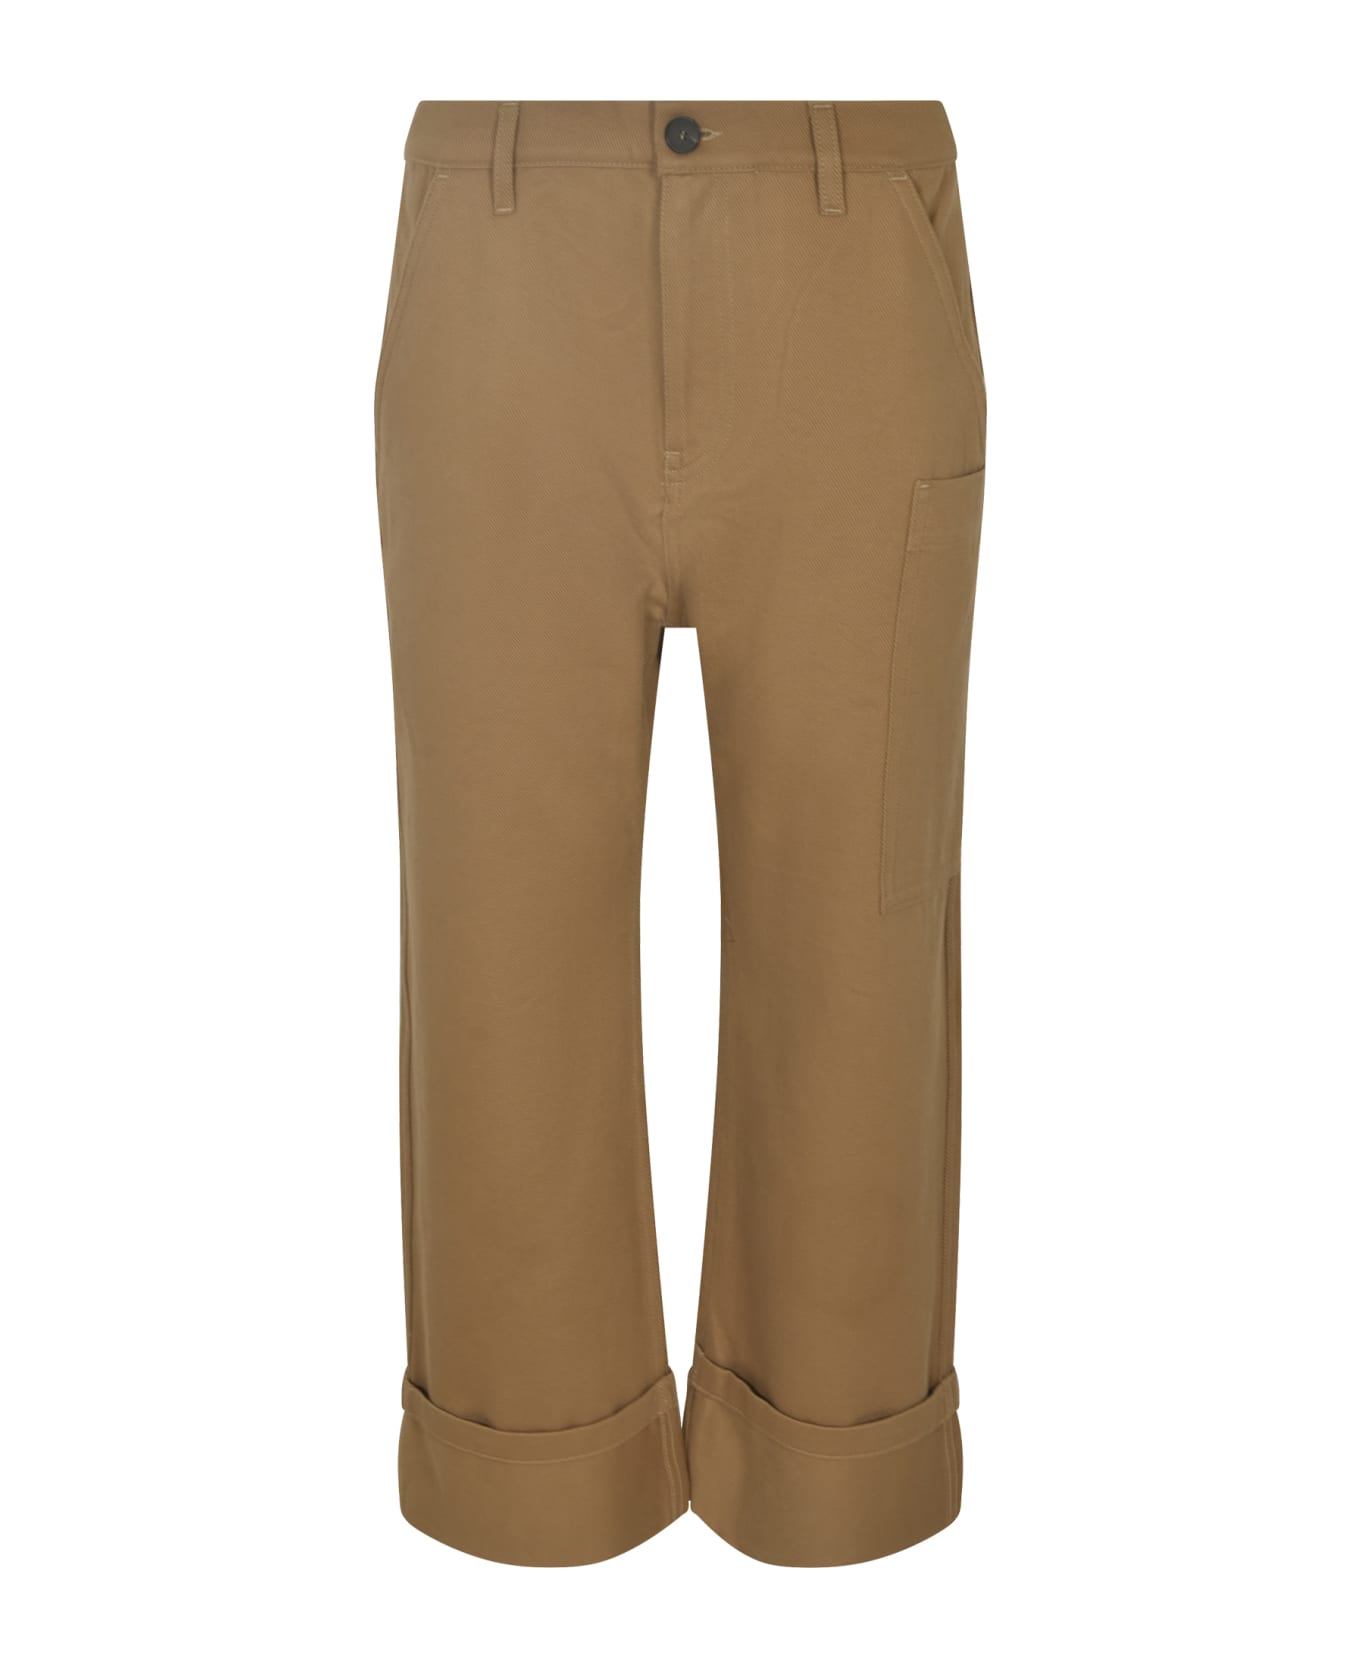 Sofie d'Hoore Straight Buttoned Trousers - Cardboard ボトムス